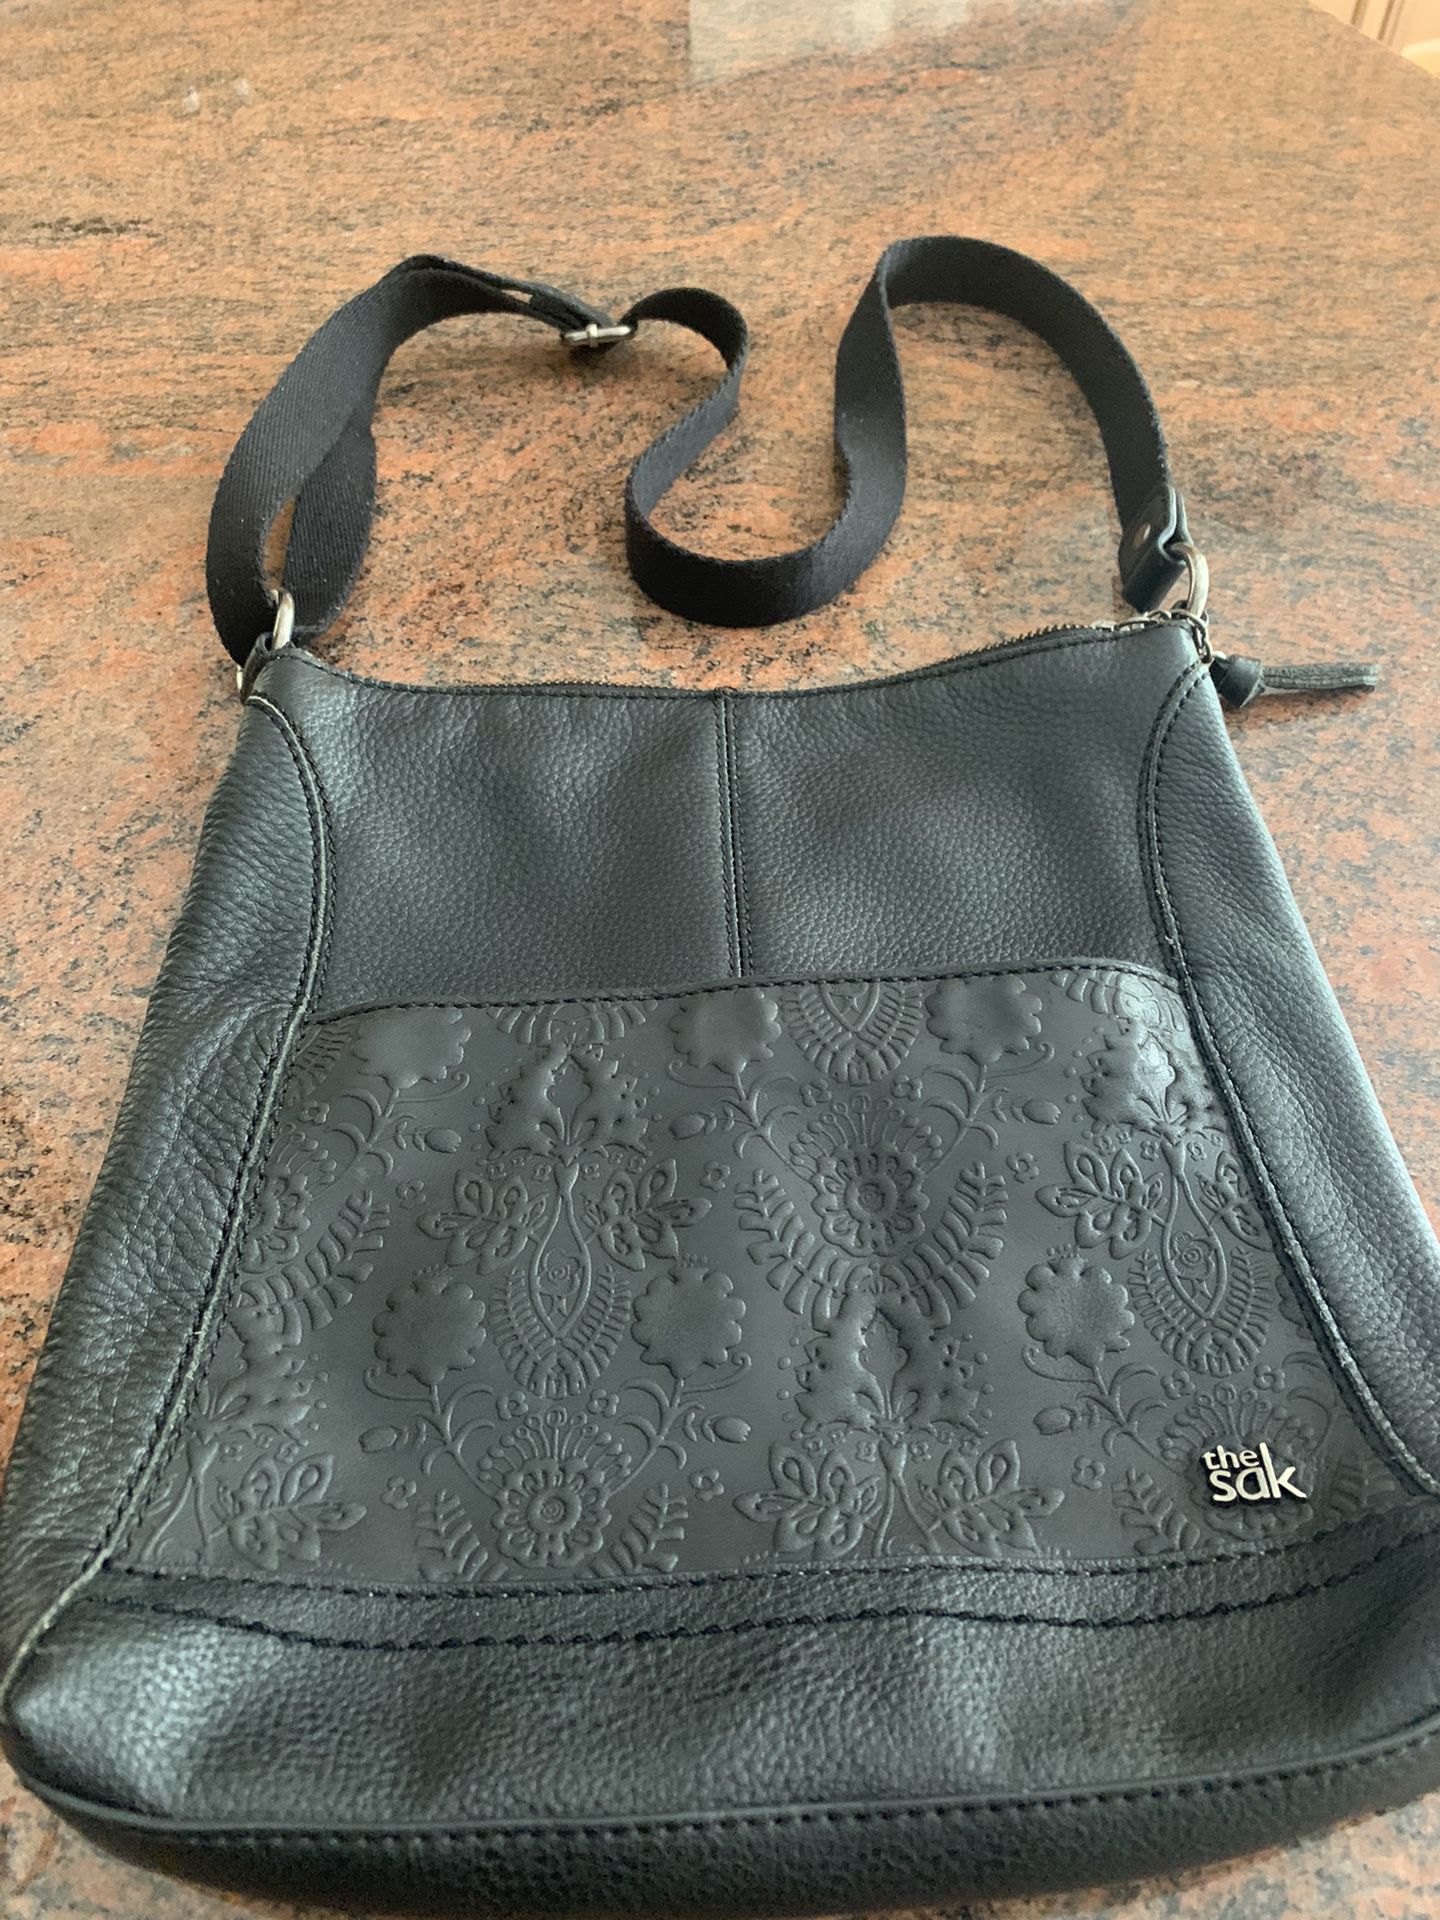 The SAK Black Leather Crossbody Hobo  Bag   12”x11”     Inside And Outside Pockets  Bag Is Very Good Condition  with wear stains  Inside by zipper   